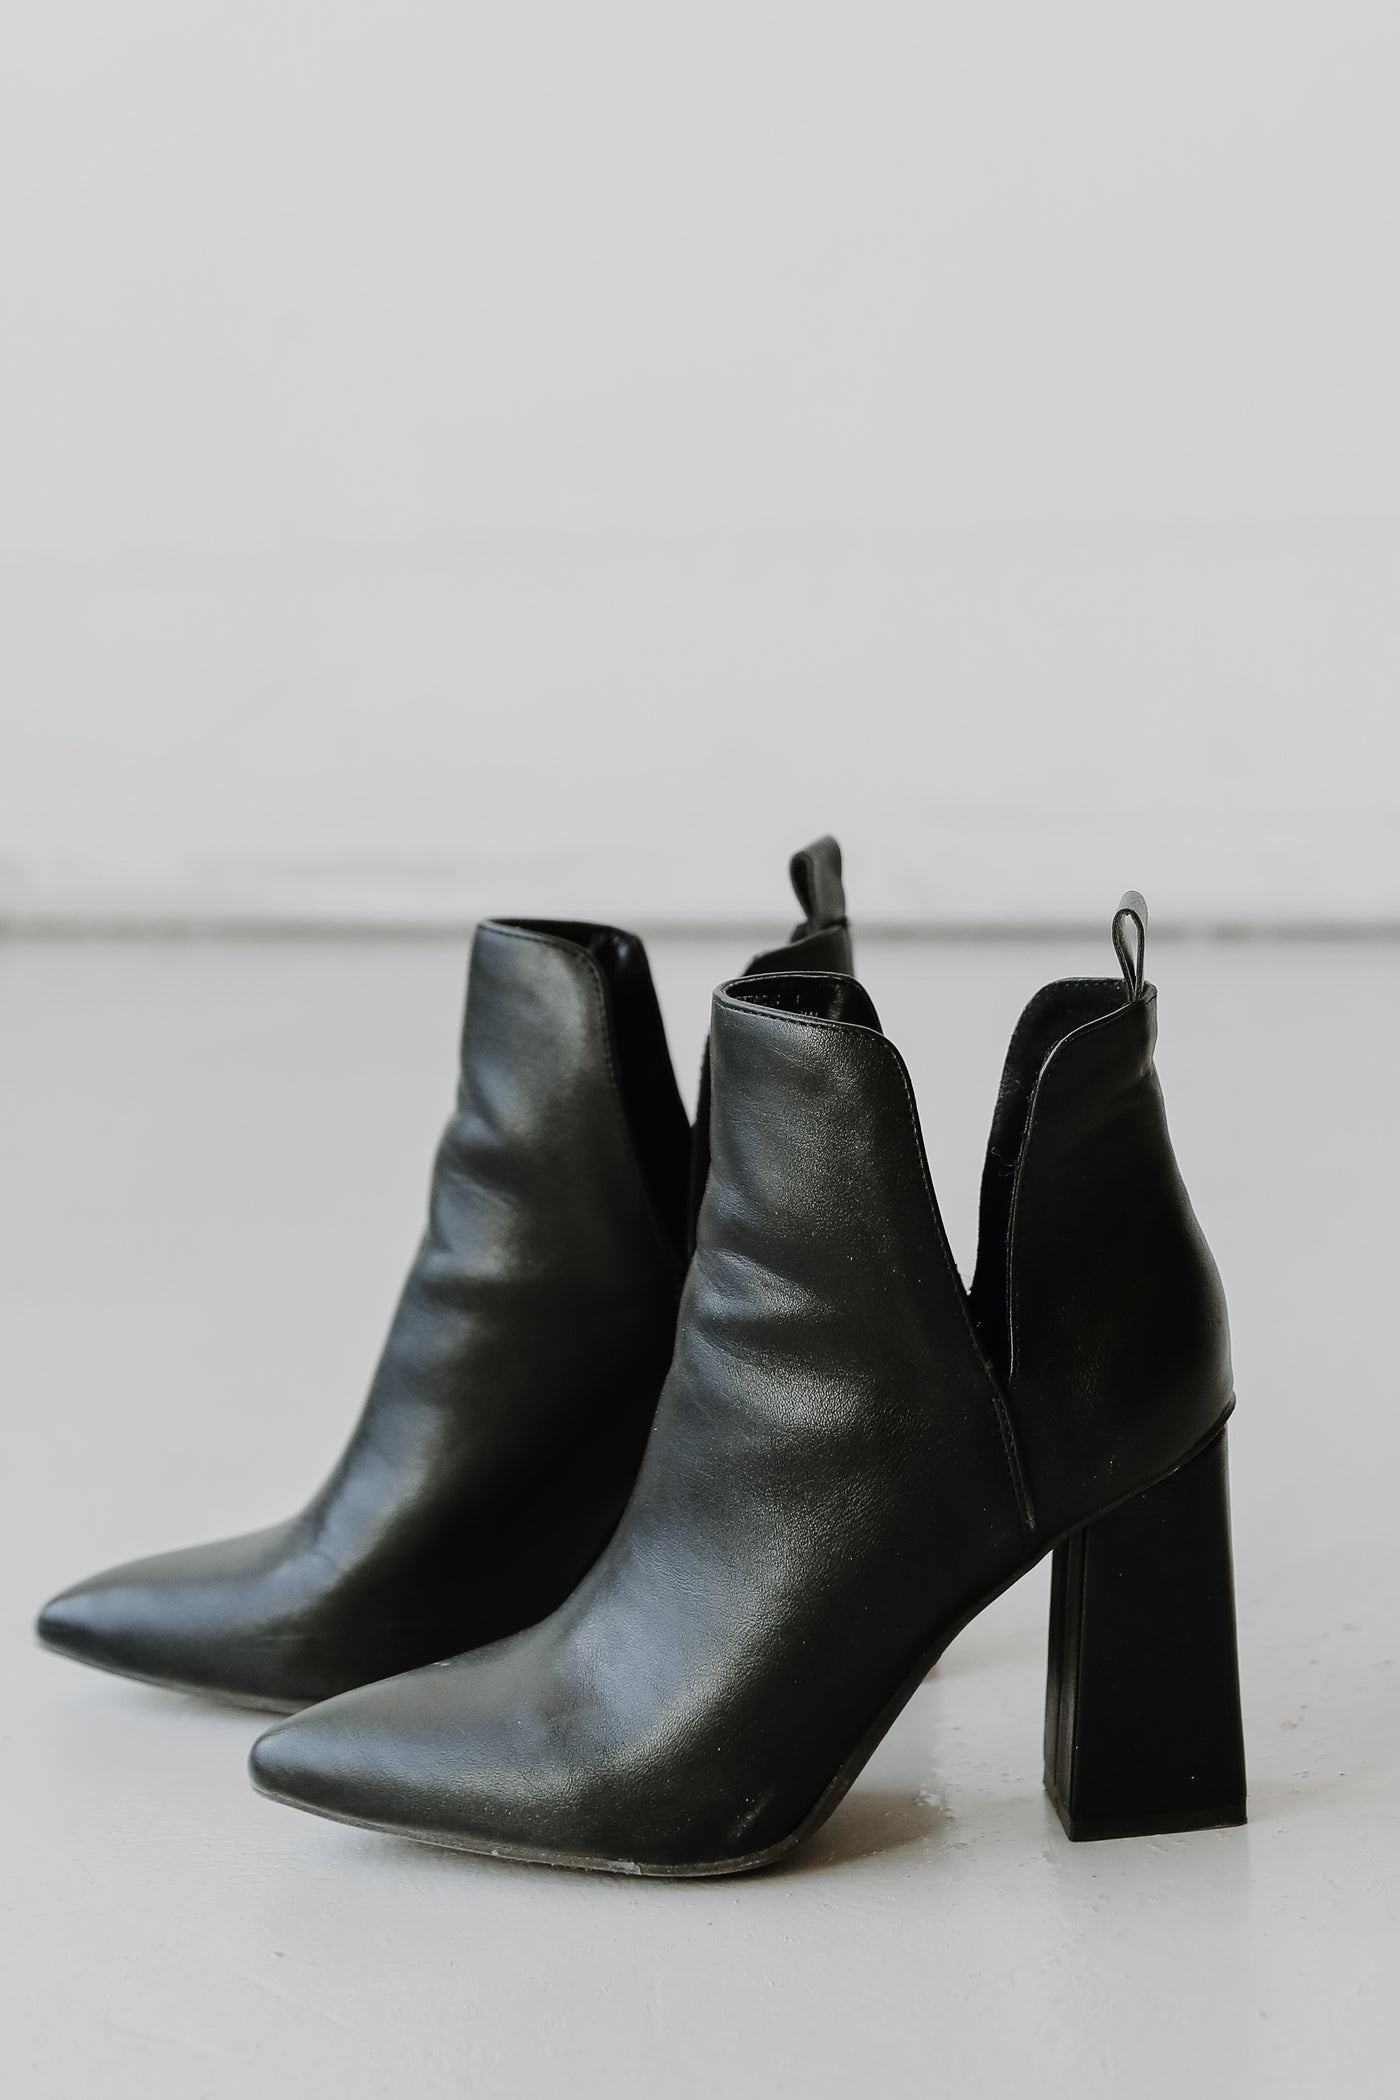 Ankle Booties in black flat lay